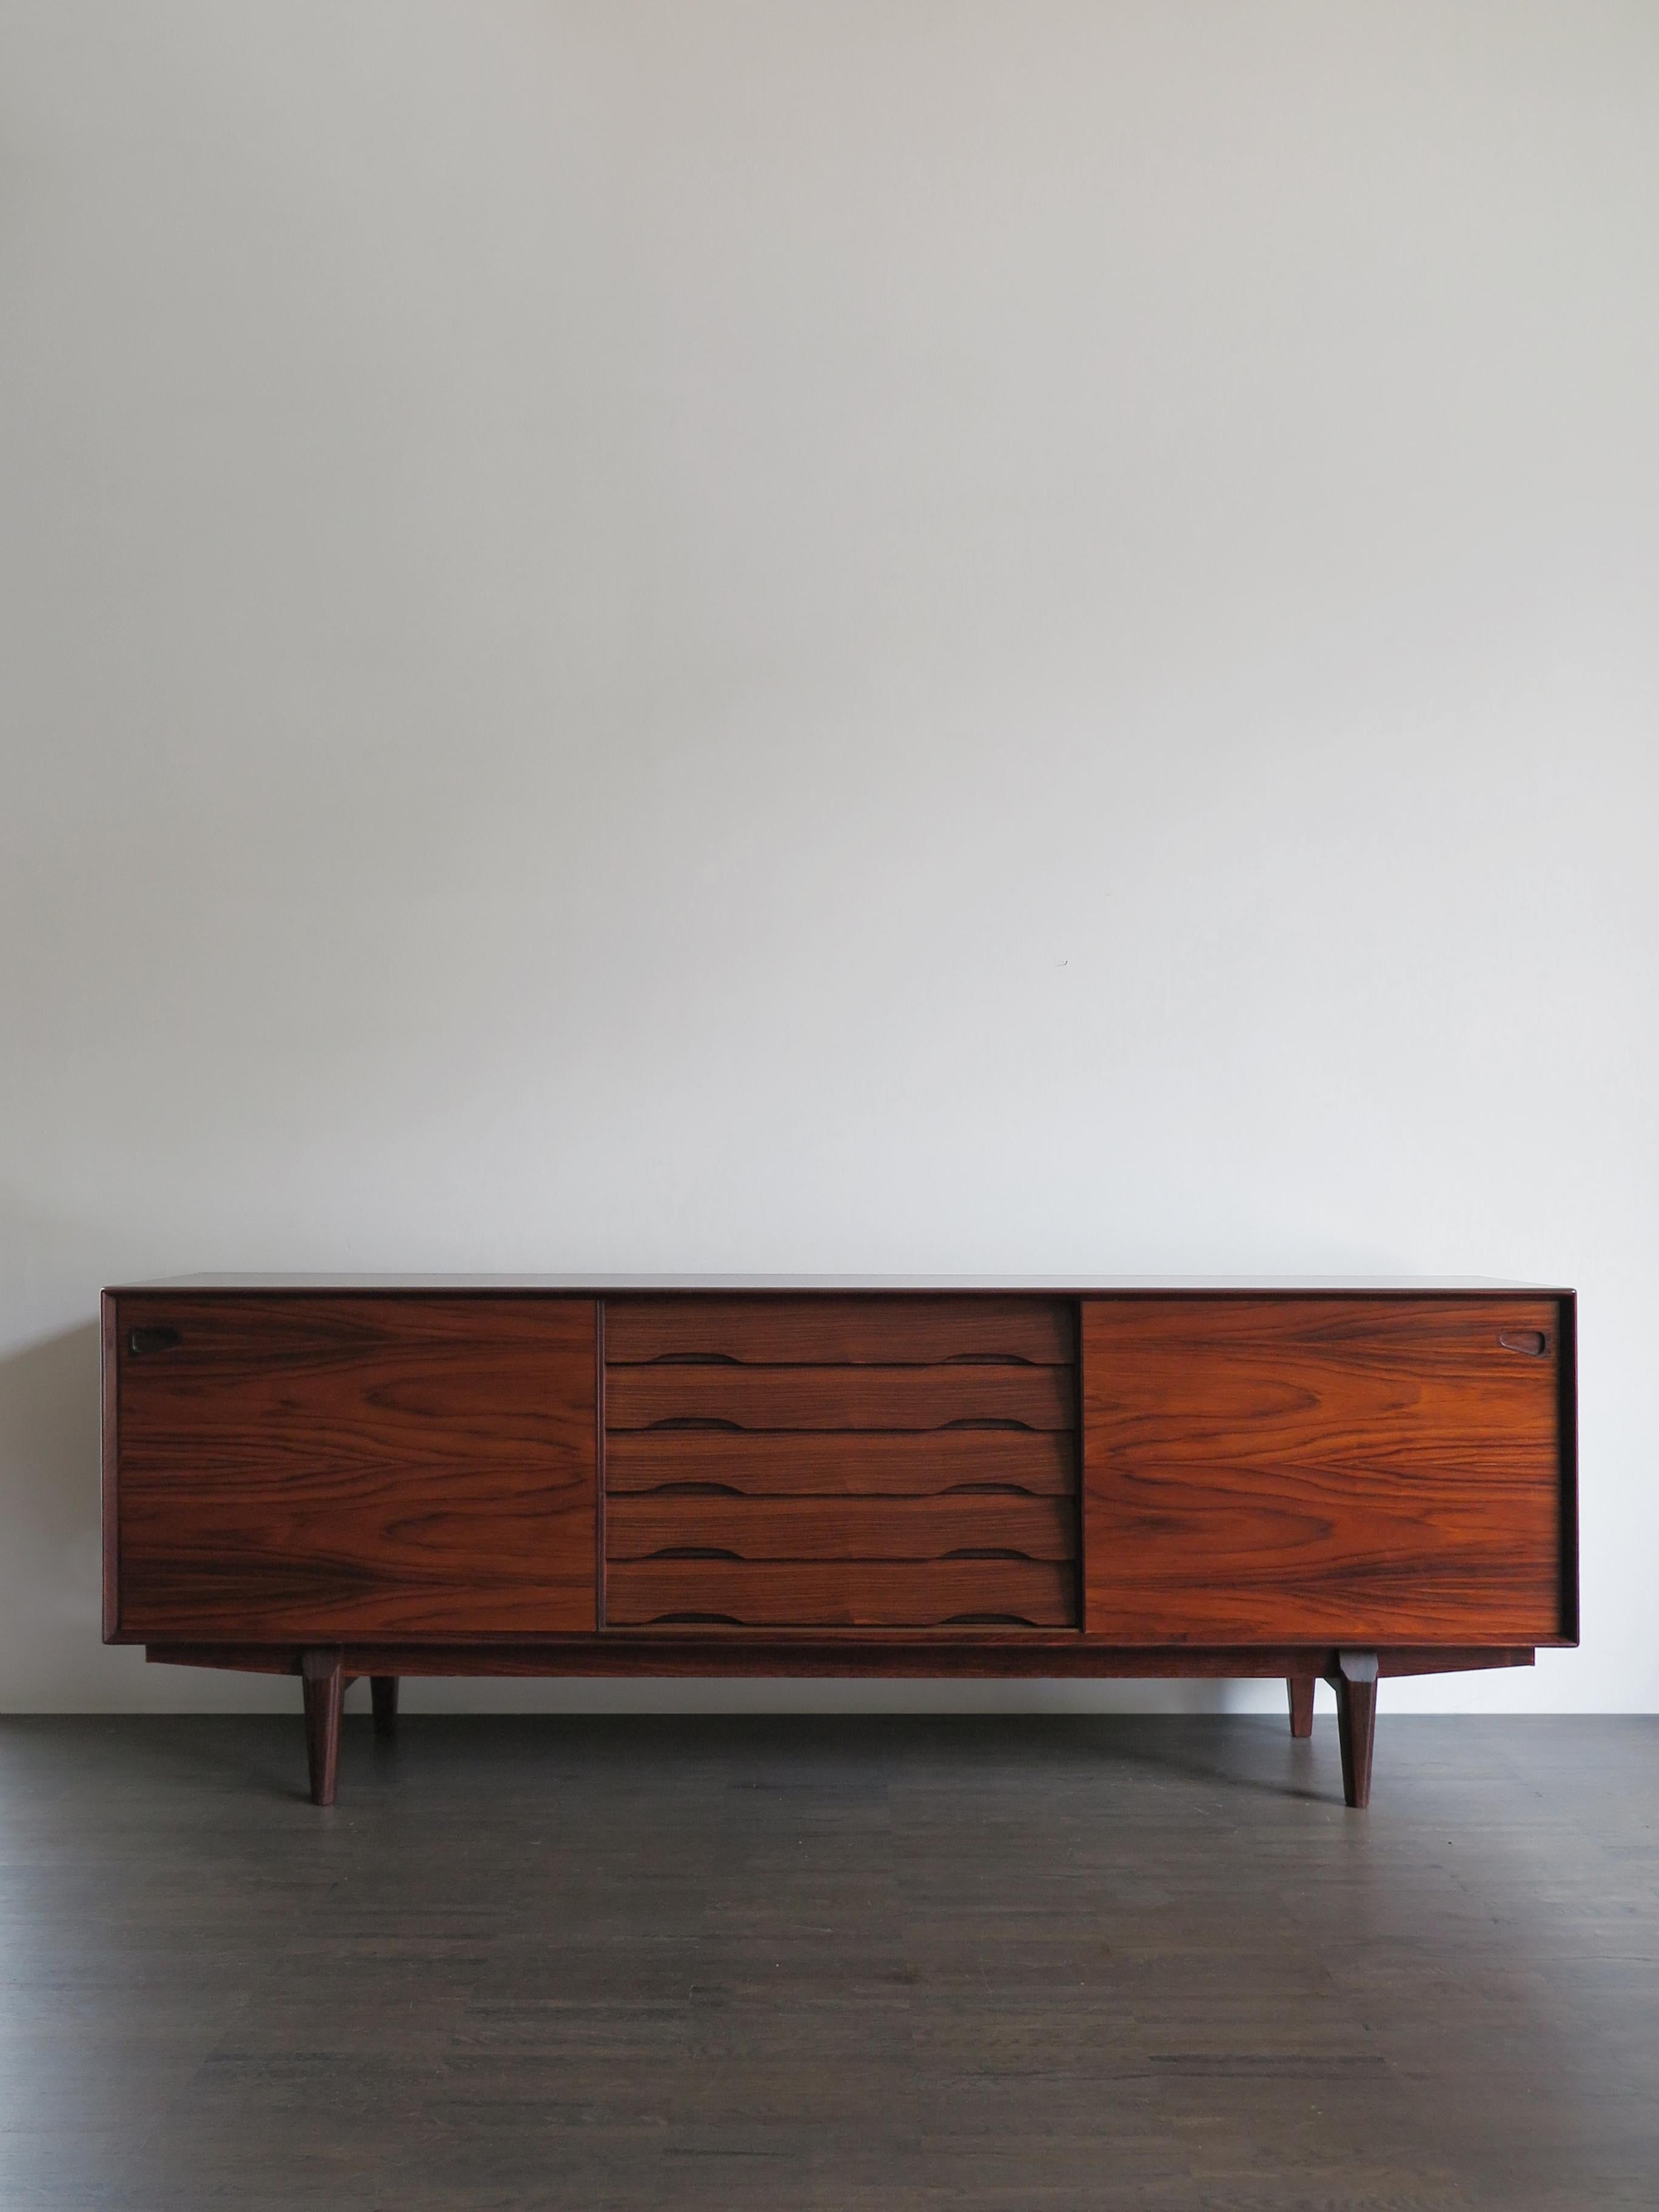 Scandinavian Mid-Century Modern design rosewood sideboard
designed by Egon Kristensen for Skovby with five chest of drawers and two big sliding doors,
produced in Denmark from 1950 circa.

Please note that the sideboard is original of the period